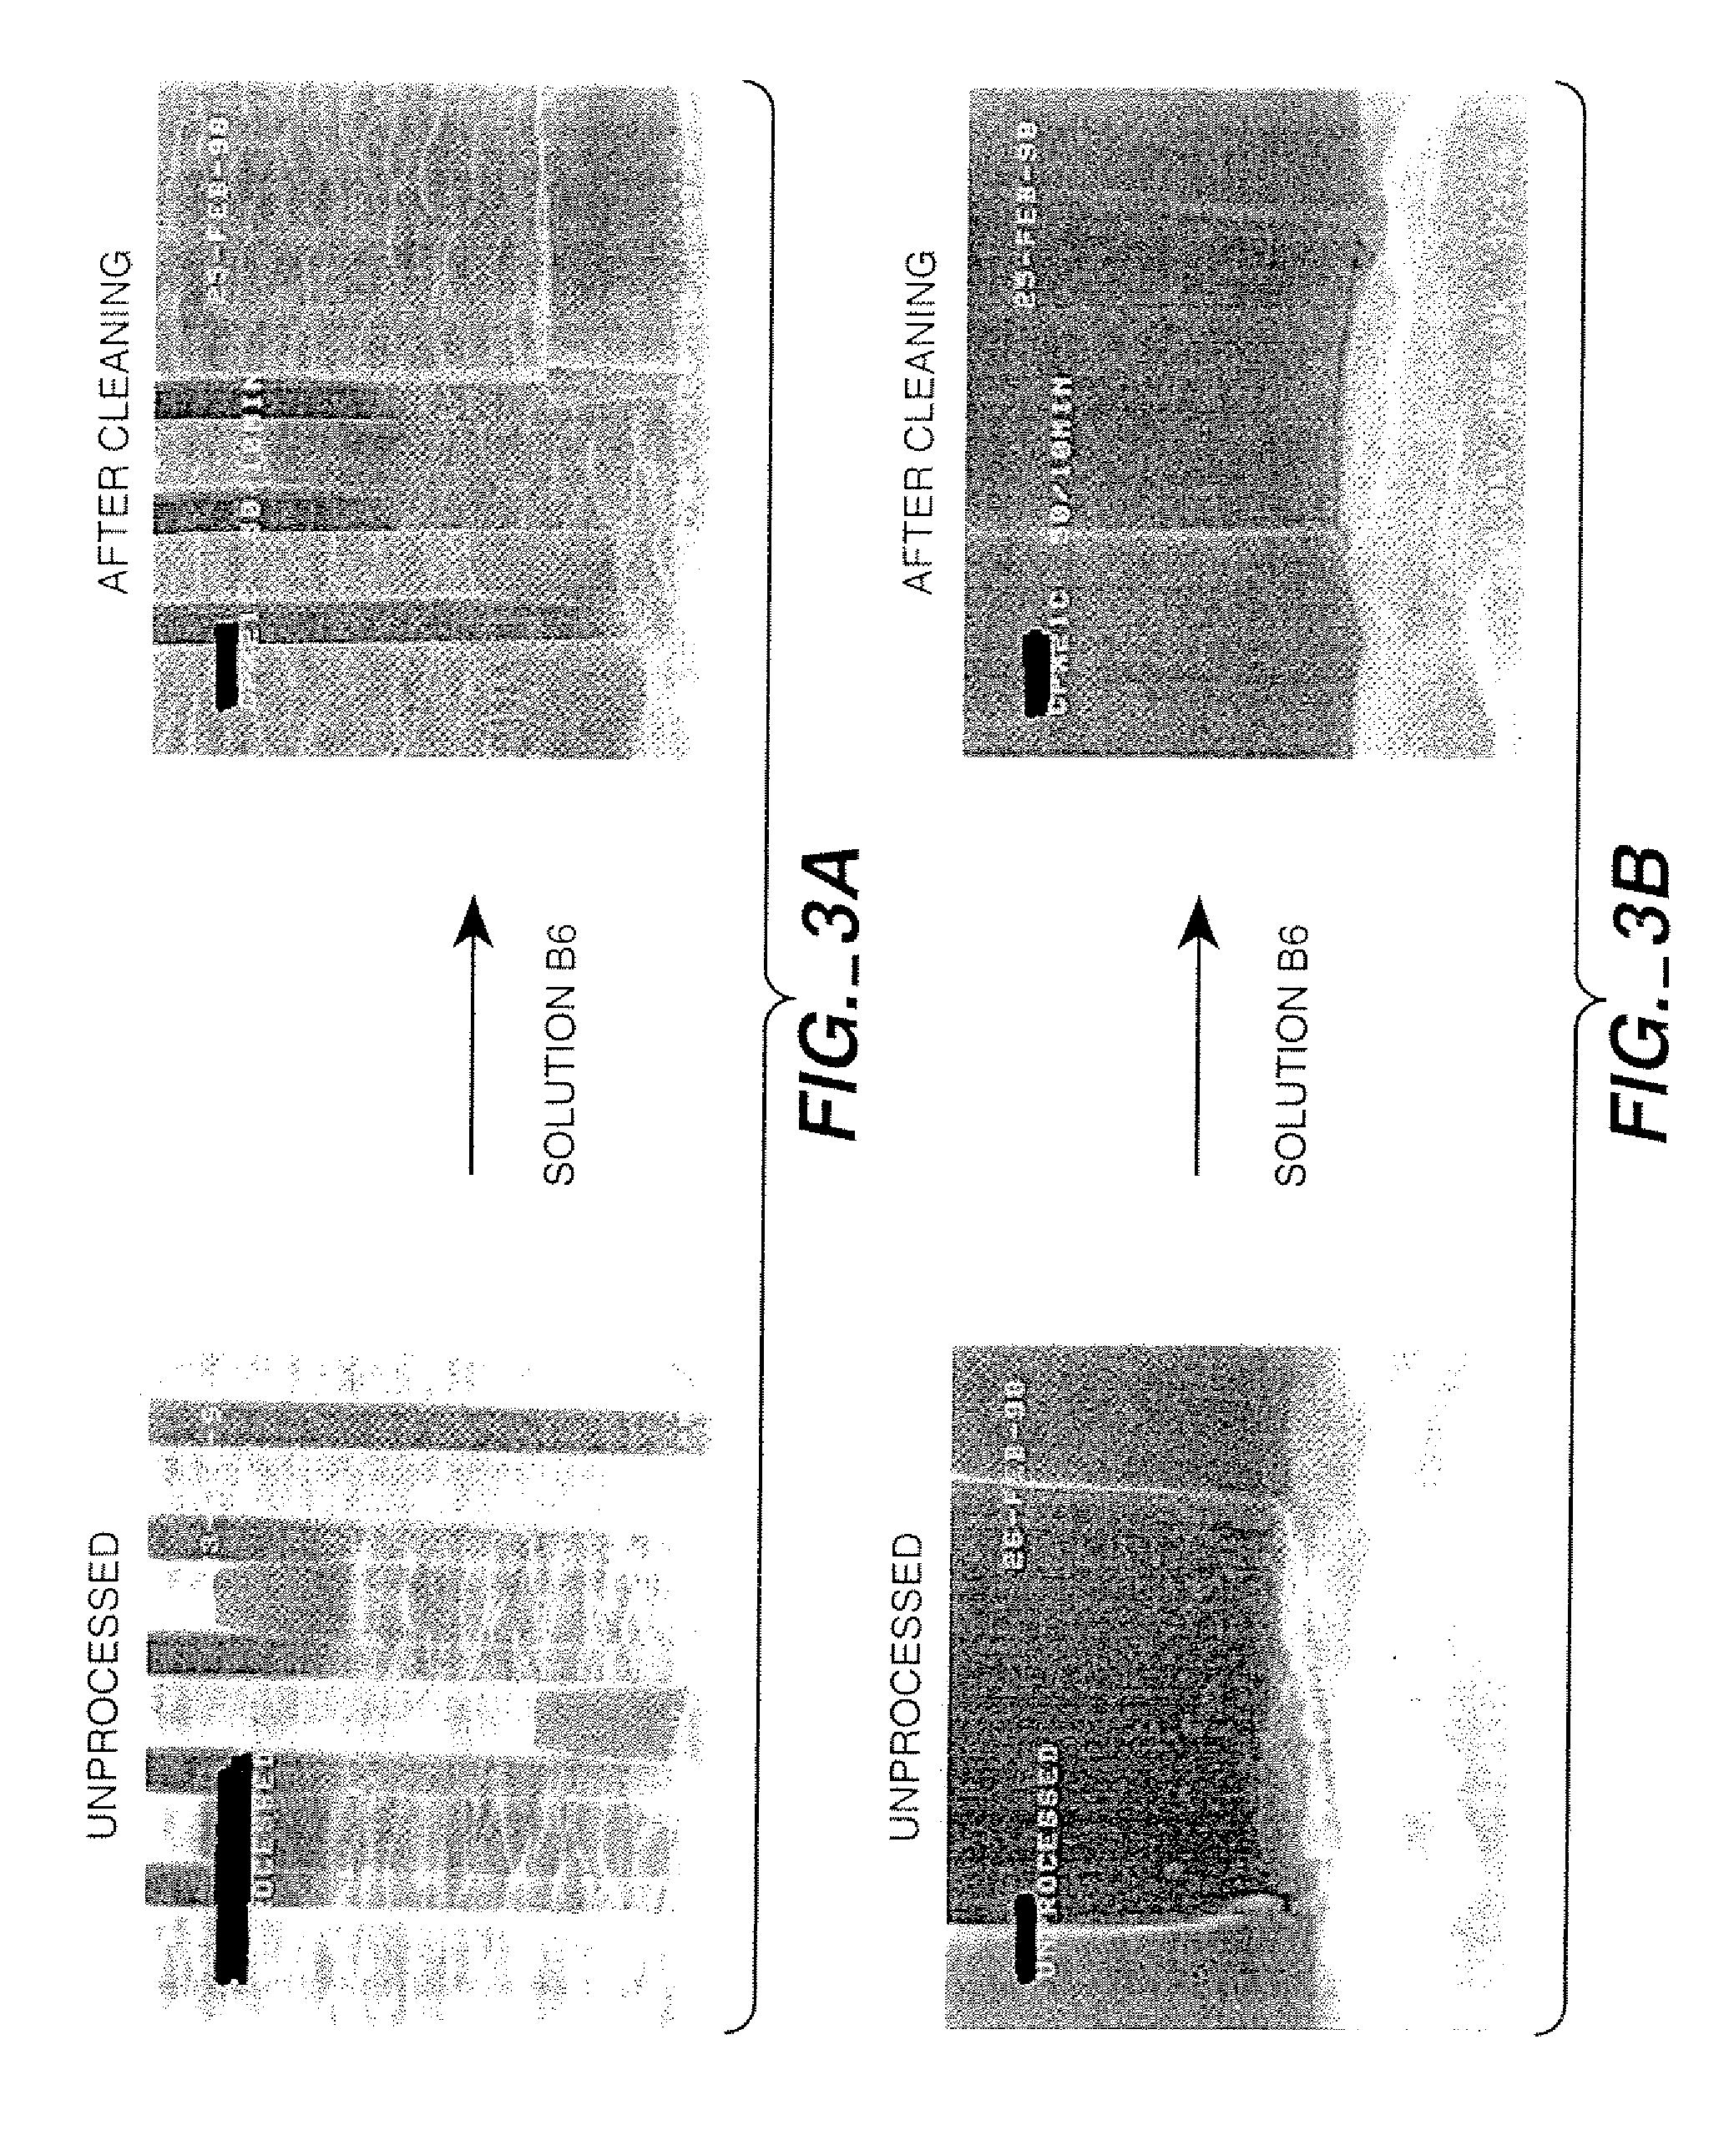 Remover compositions for dual damascene system